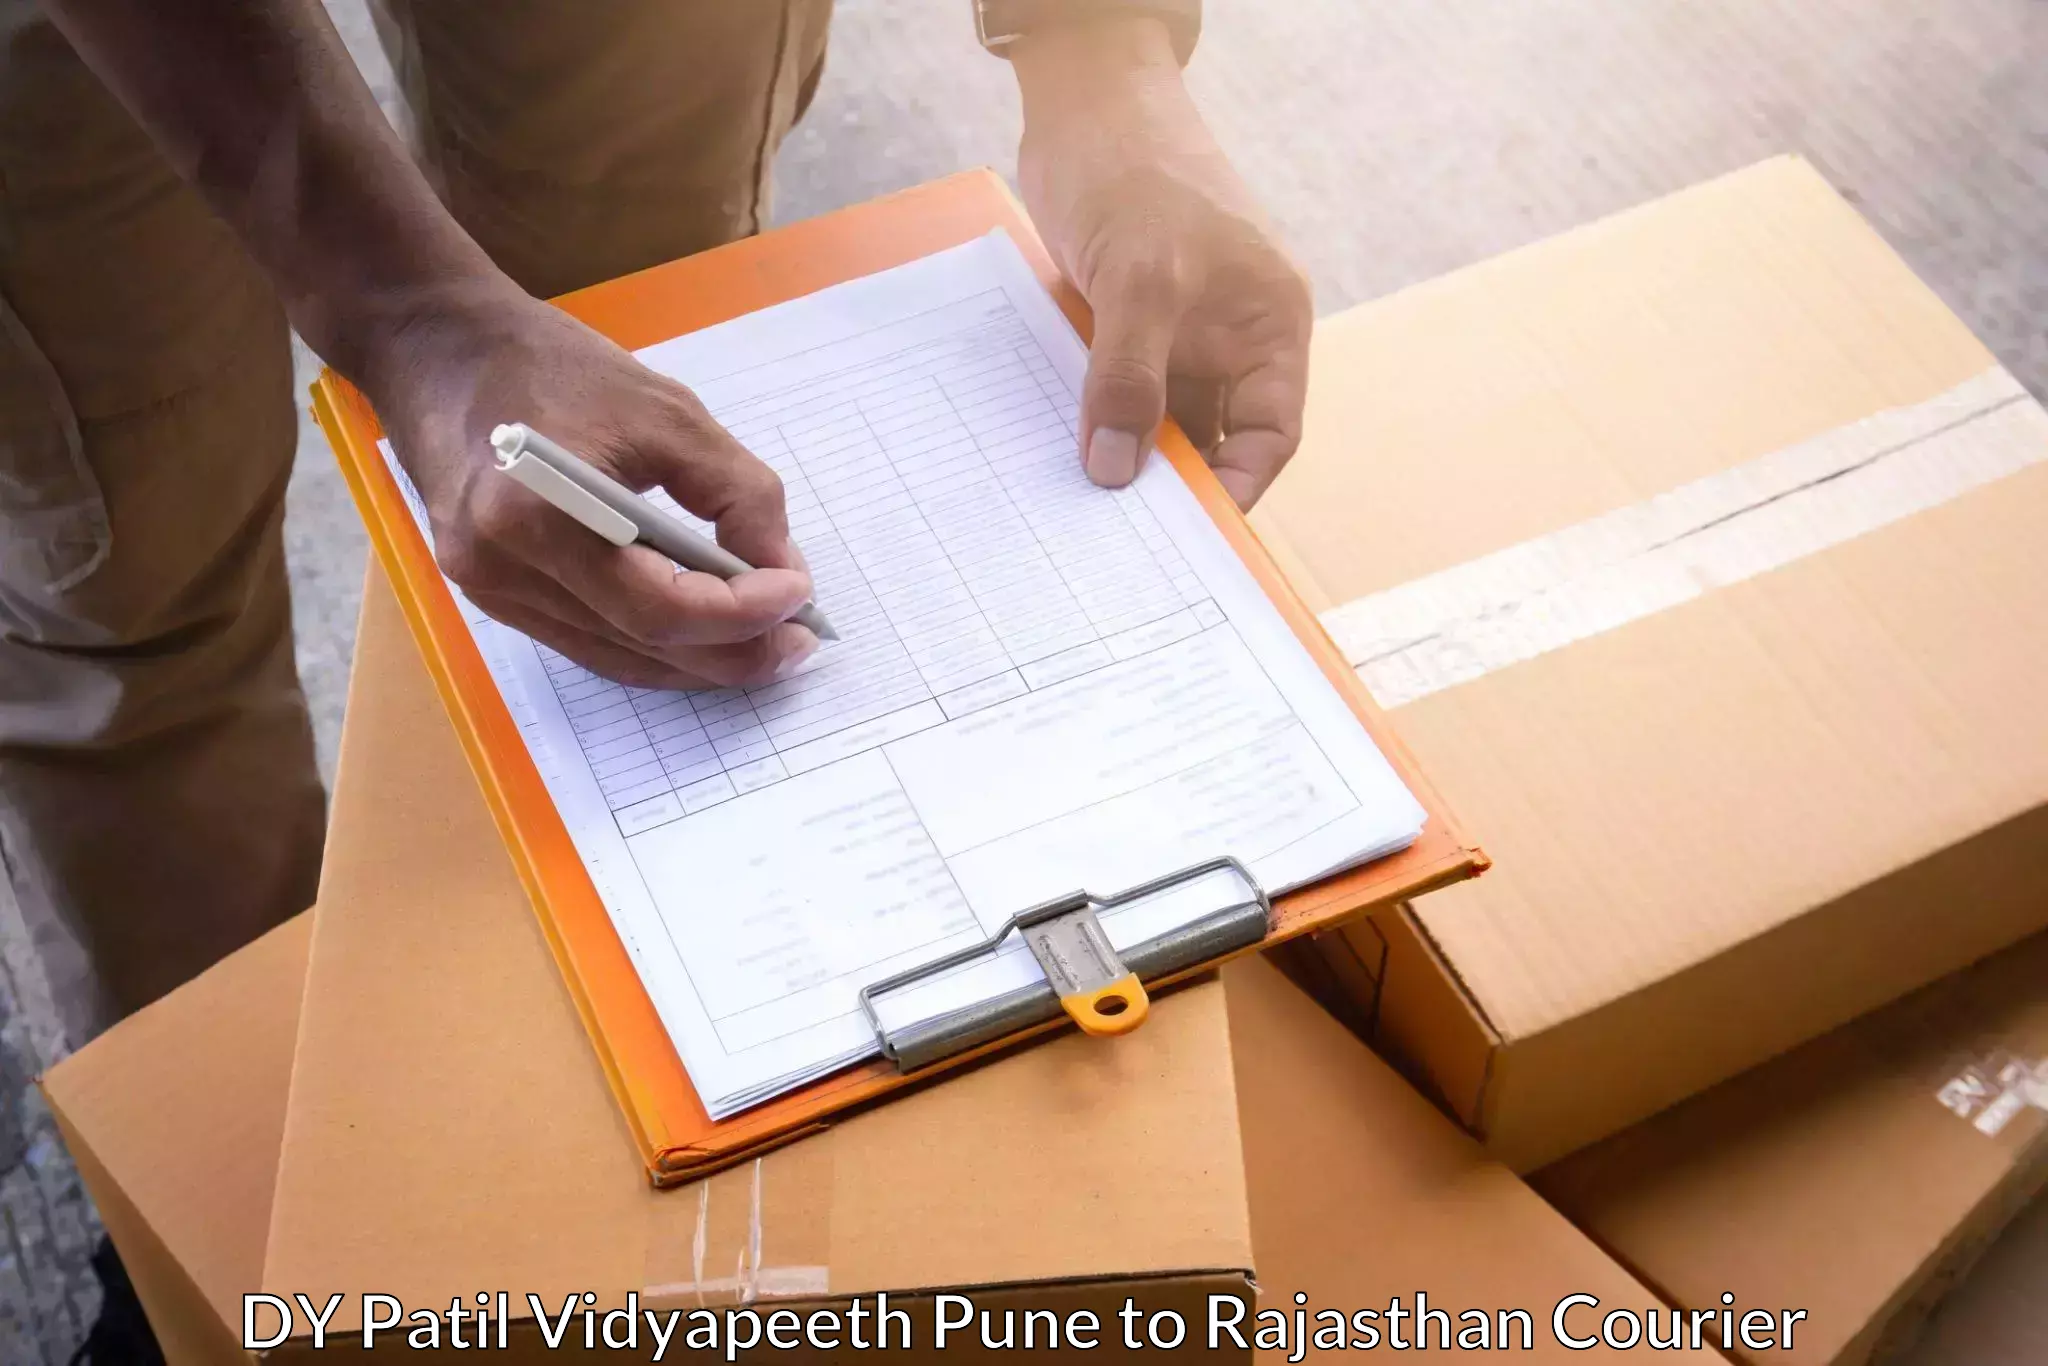 Seamless shipping service DY Patil Vidyapeeth Pune to Renwal